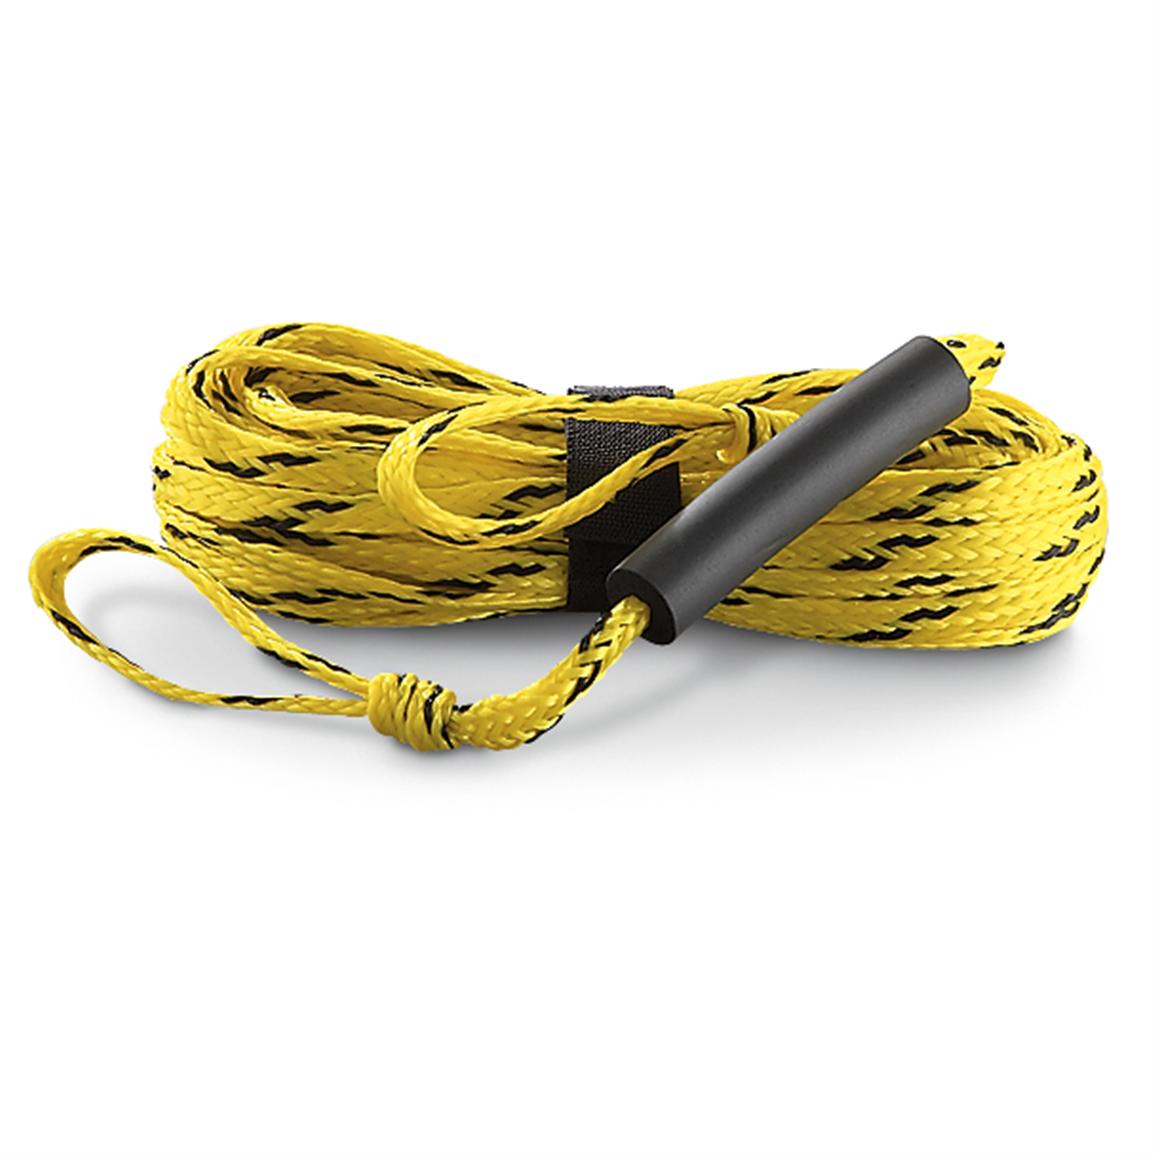 Full Throttle® 60' Towable Tube Rope with Float - 185023, Ropes ...